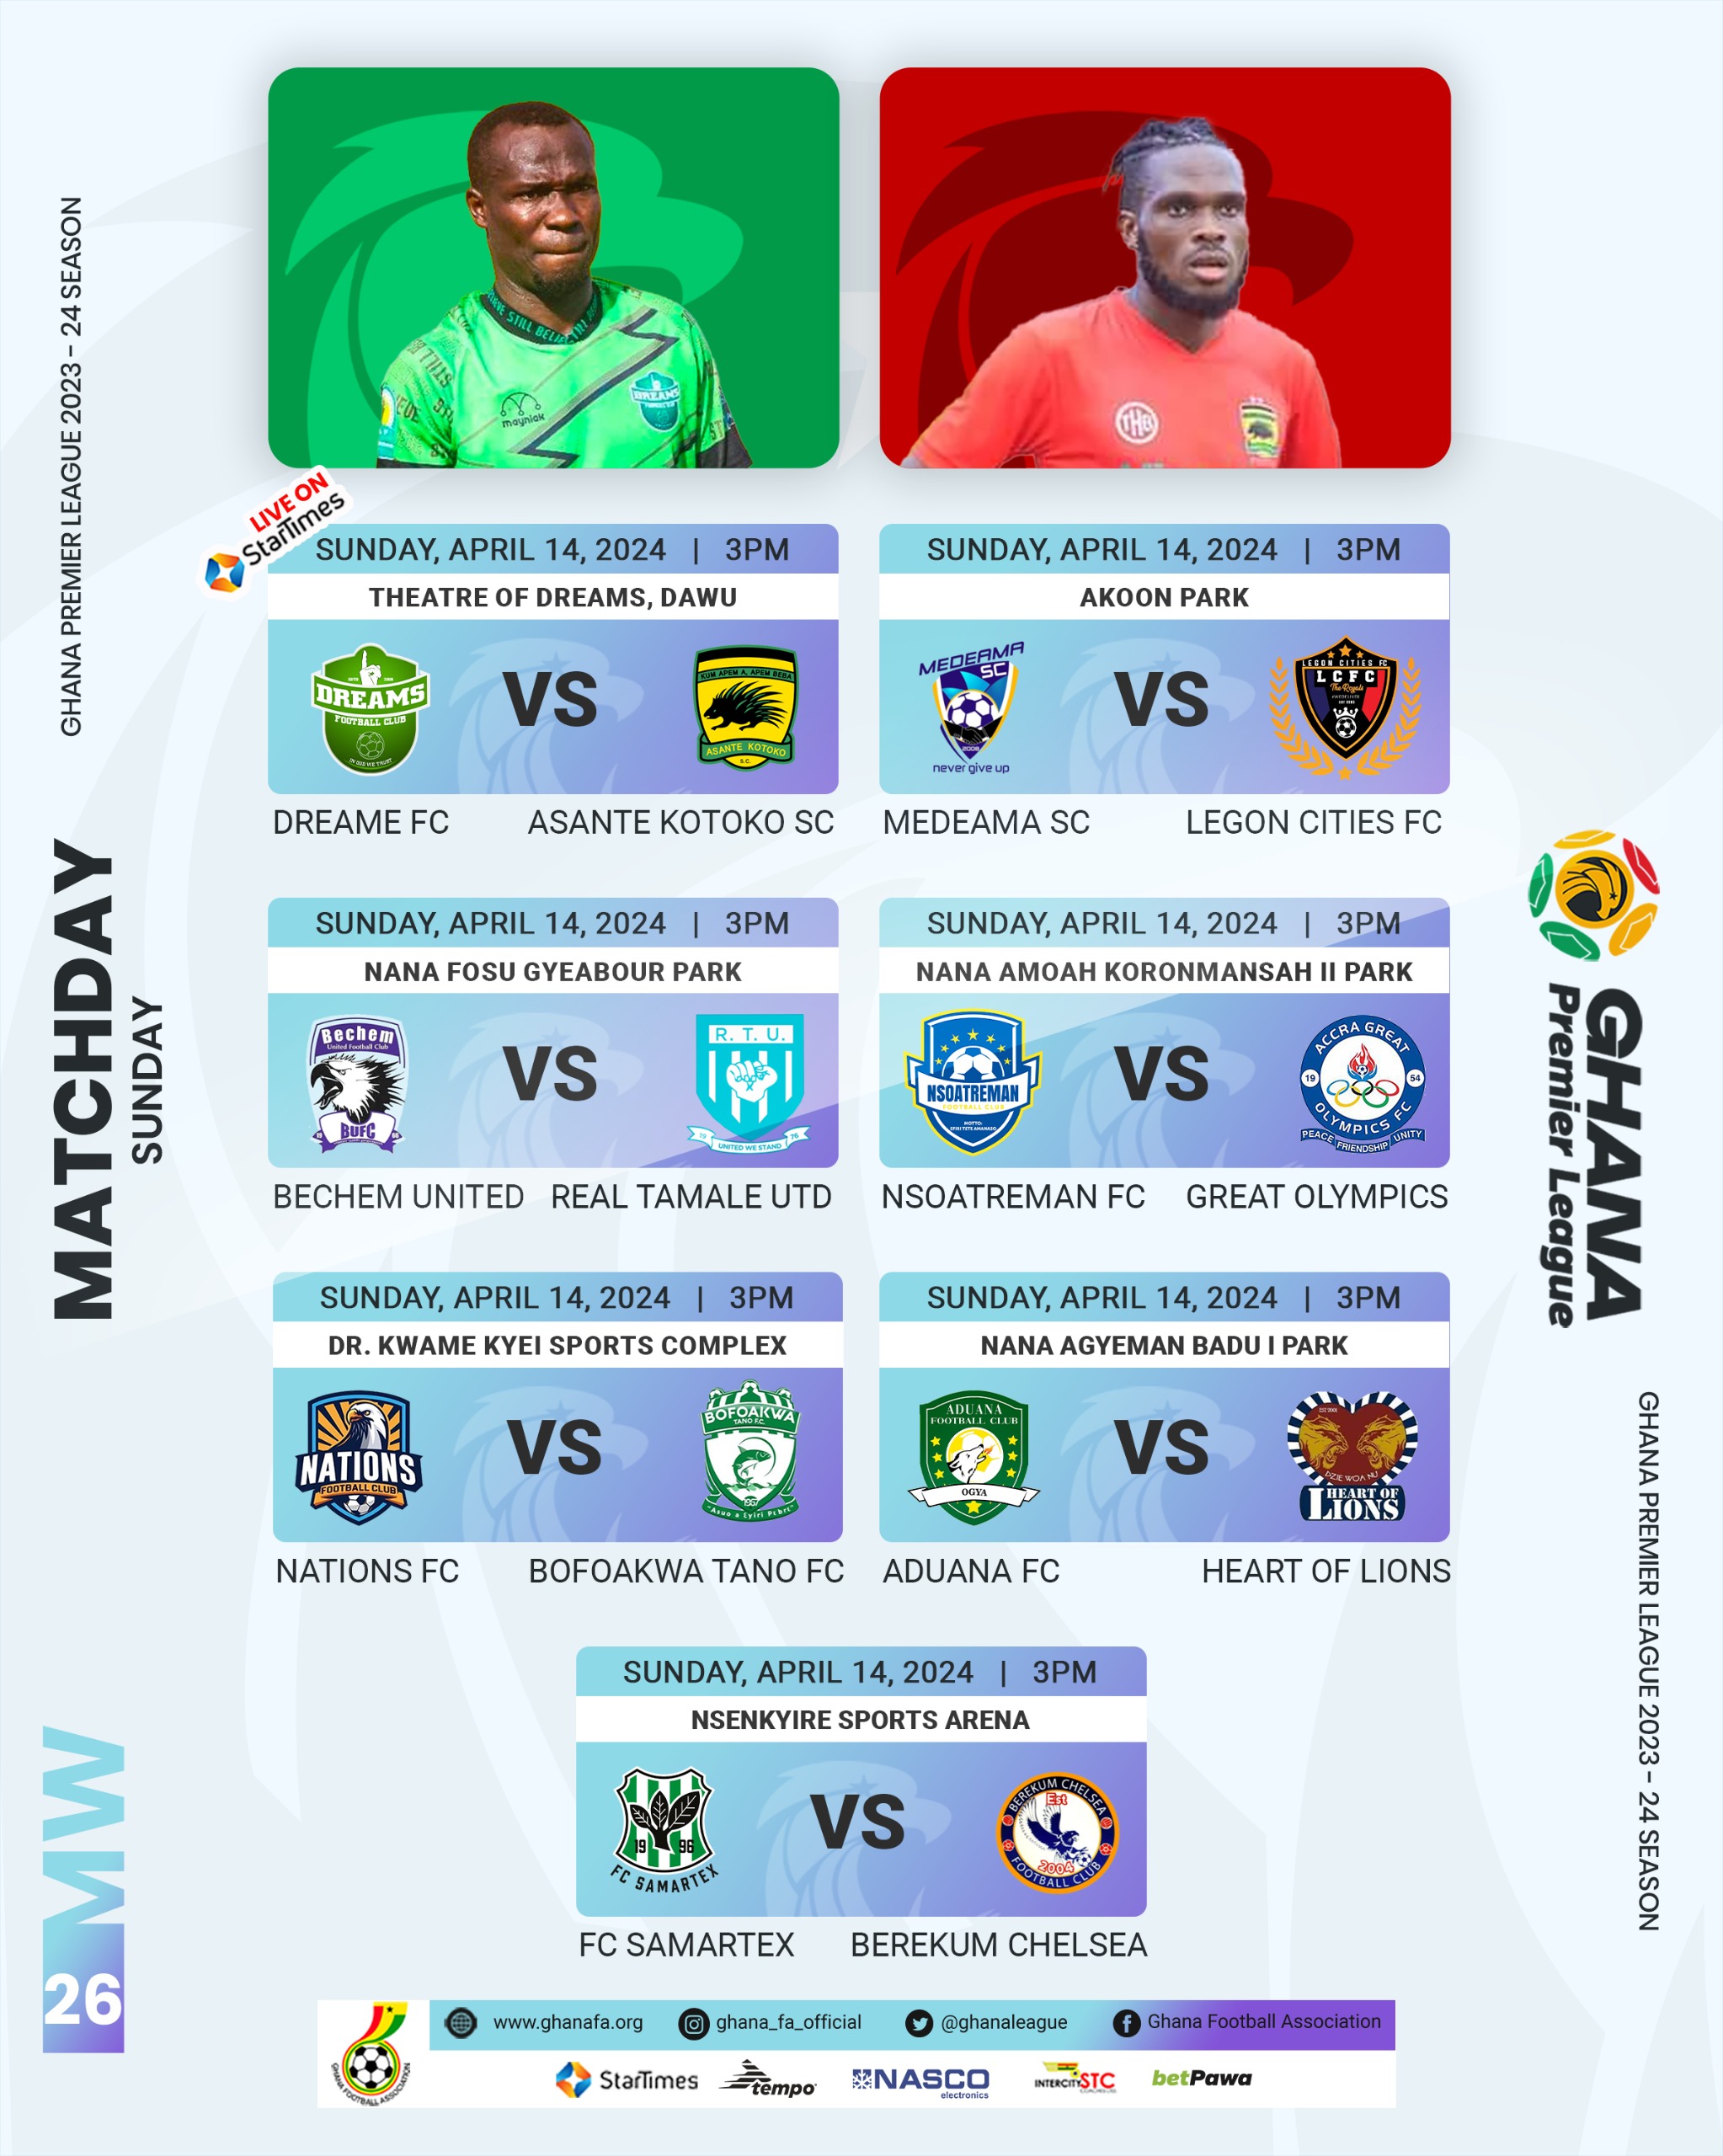 Match-by-Match Preview for Day-26 of Ghana Premier League